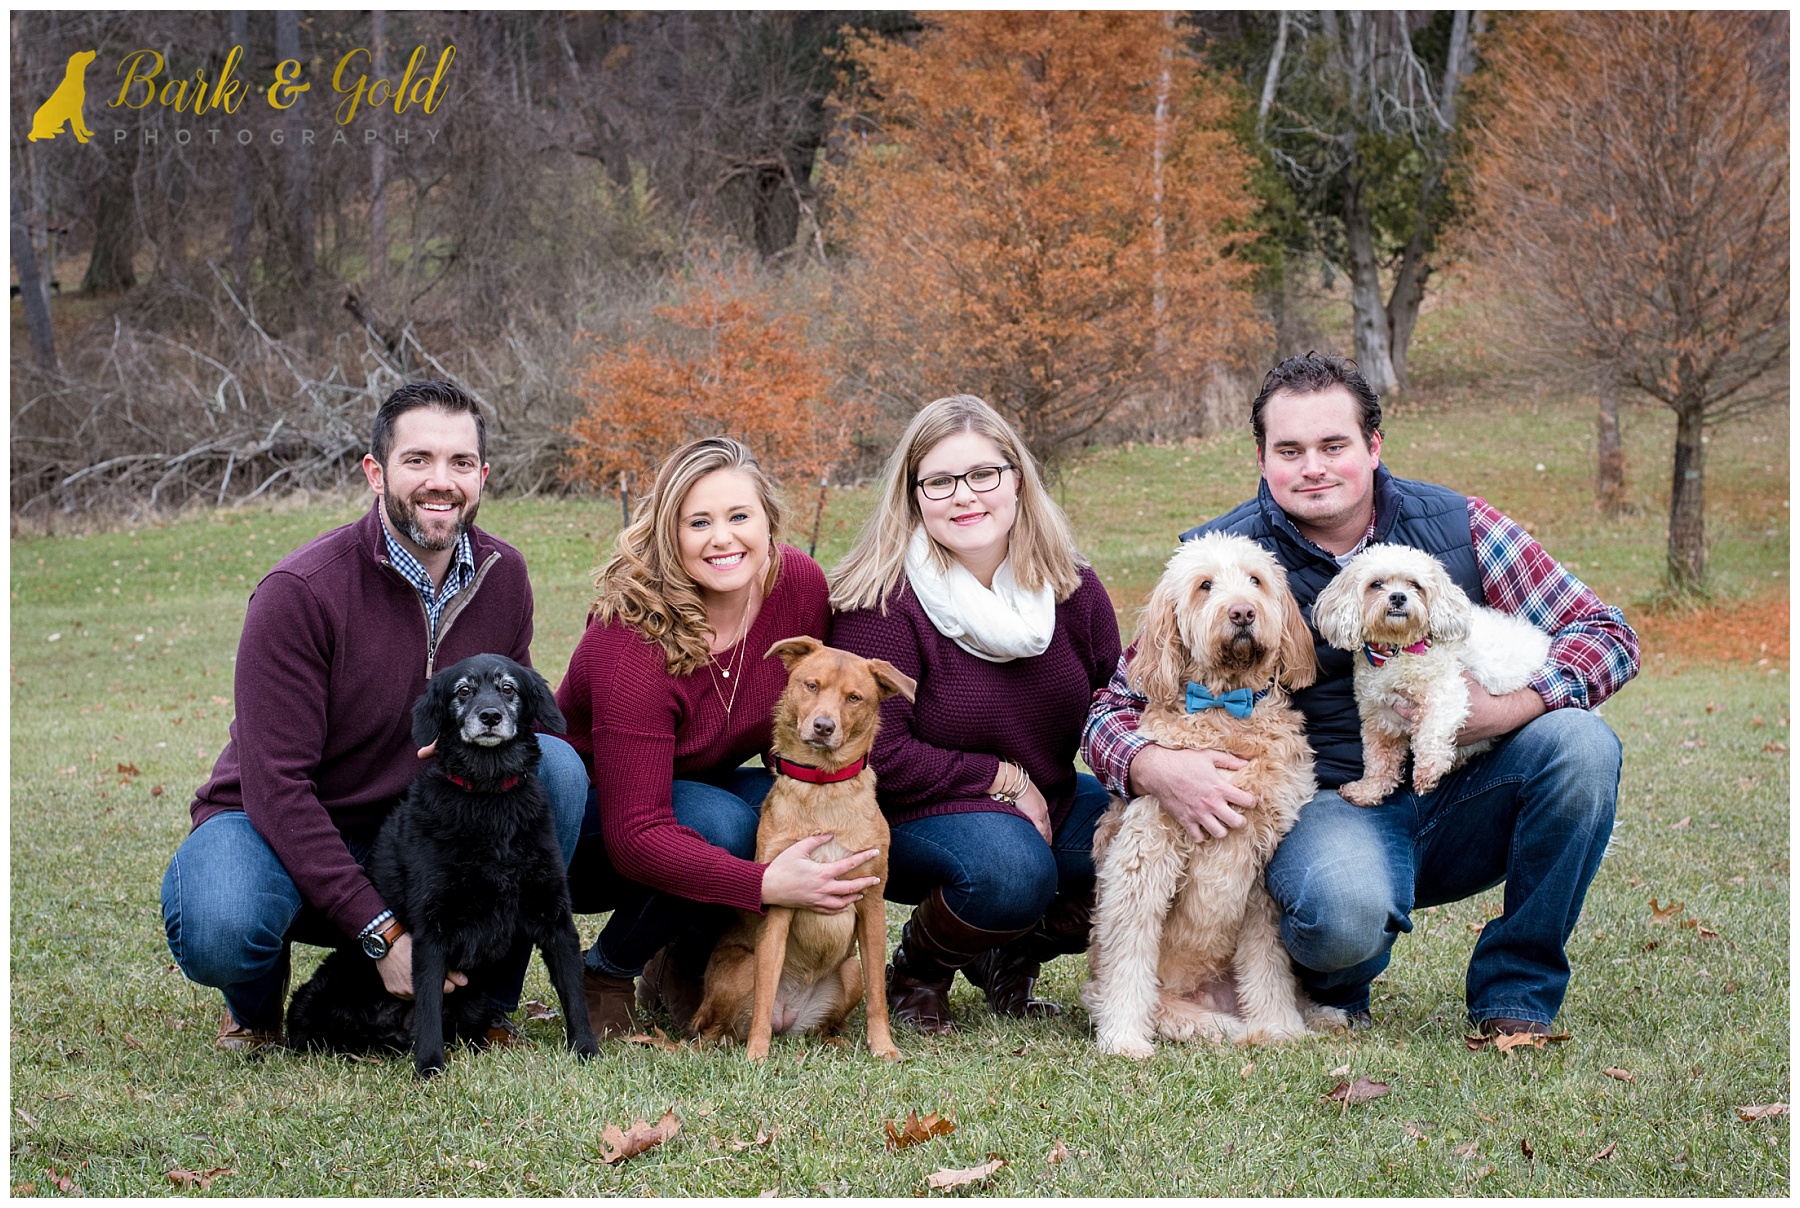 siblings pose with four dogs in a field during a fall portrait session at North Park in Gibsonia